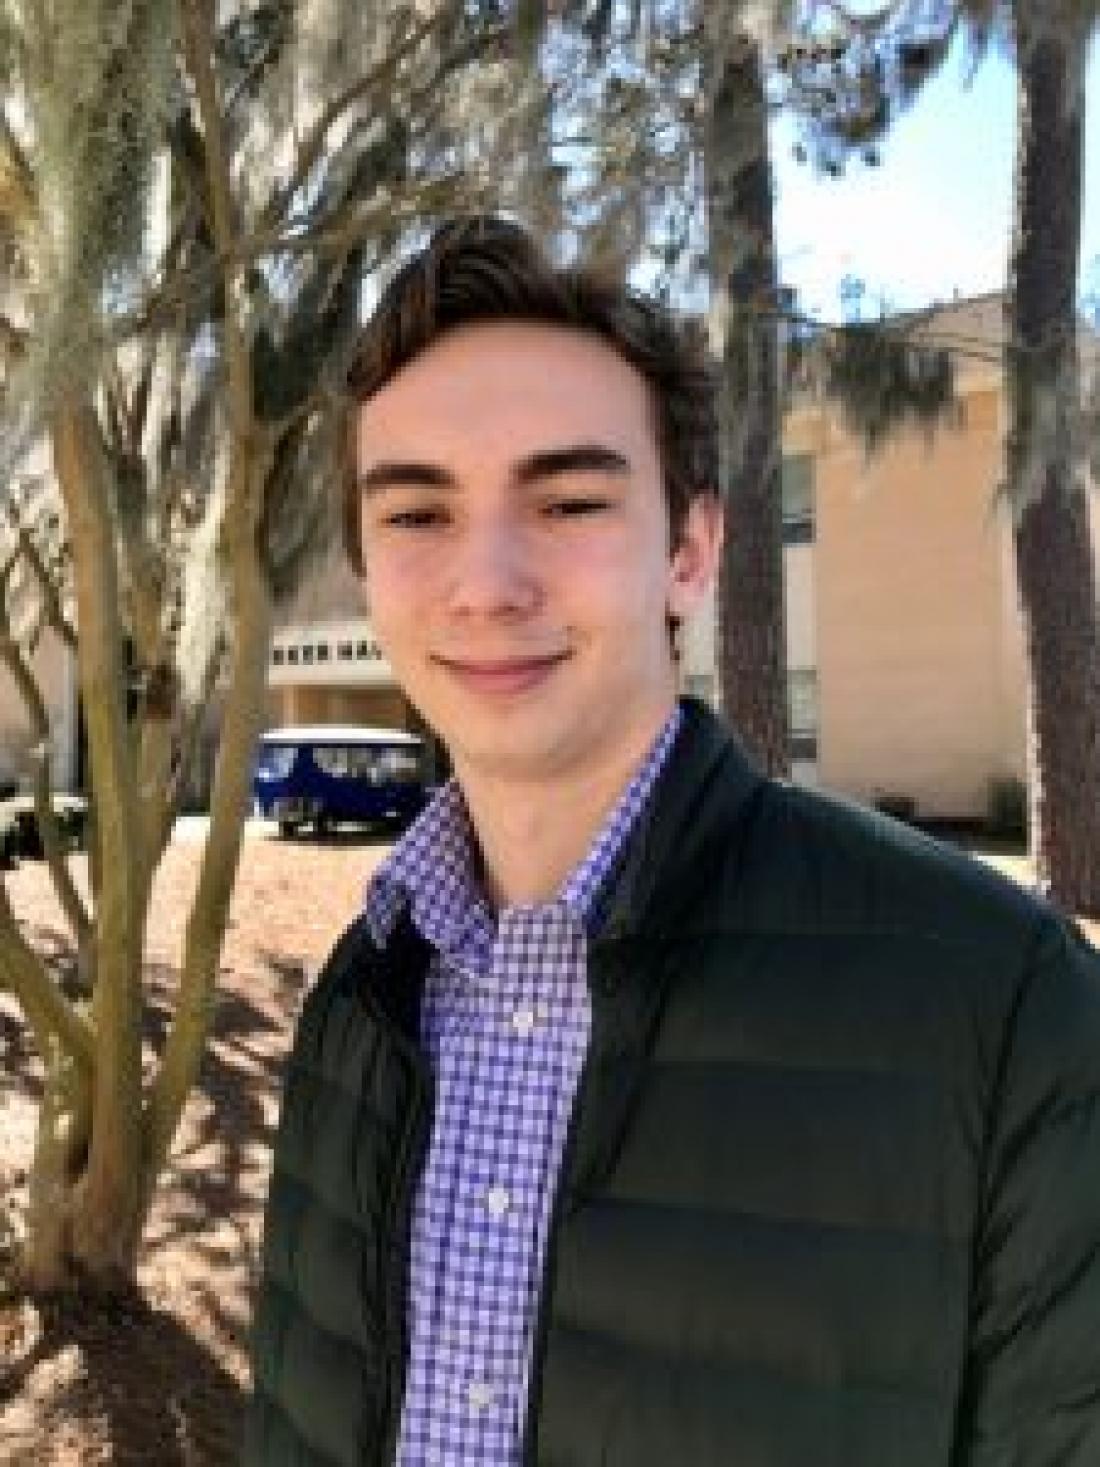 High school junior Dominic Farina recently became a part-time intern for Craven Community College’s Small Business Center. This opportunity was made possible by Craven County Schools Career and Technical Education (CTE), an internship program that pairs 11th and 12th graders with local businesses.